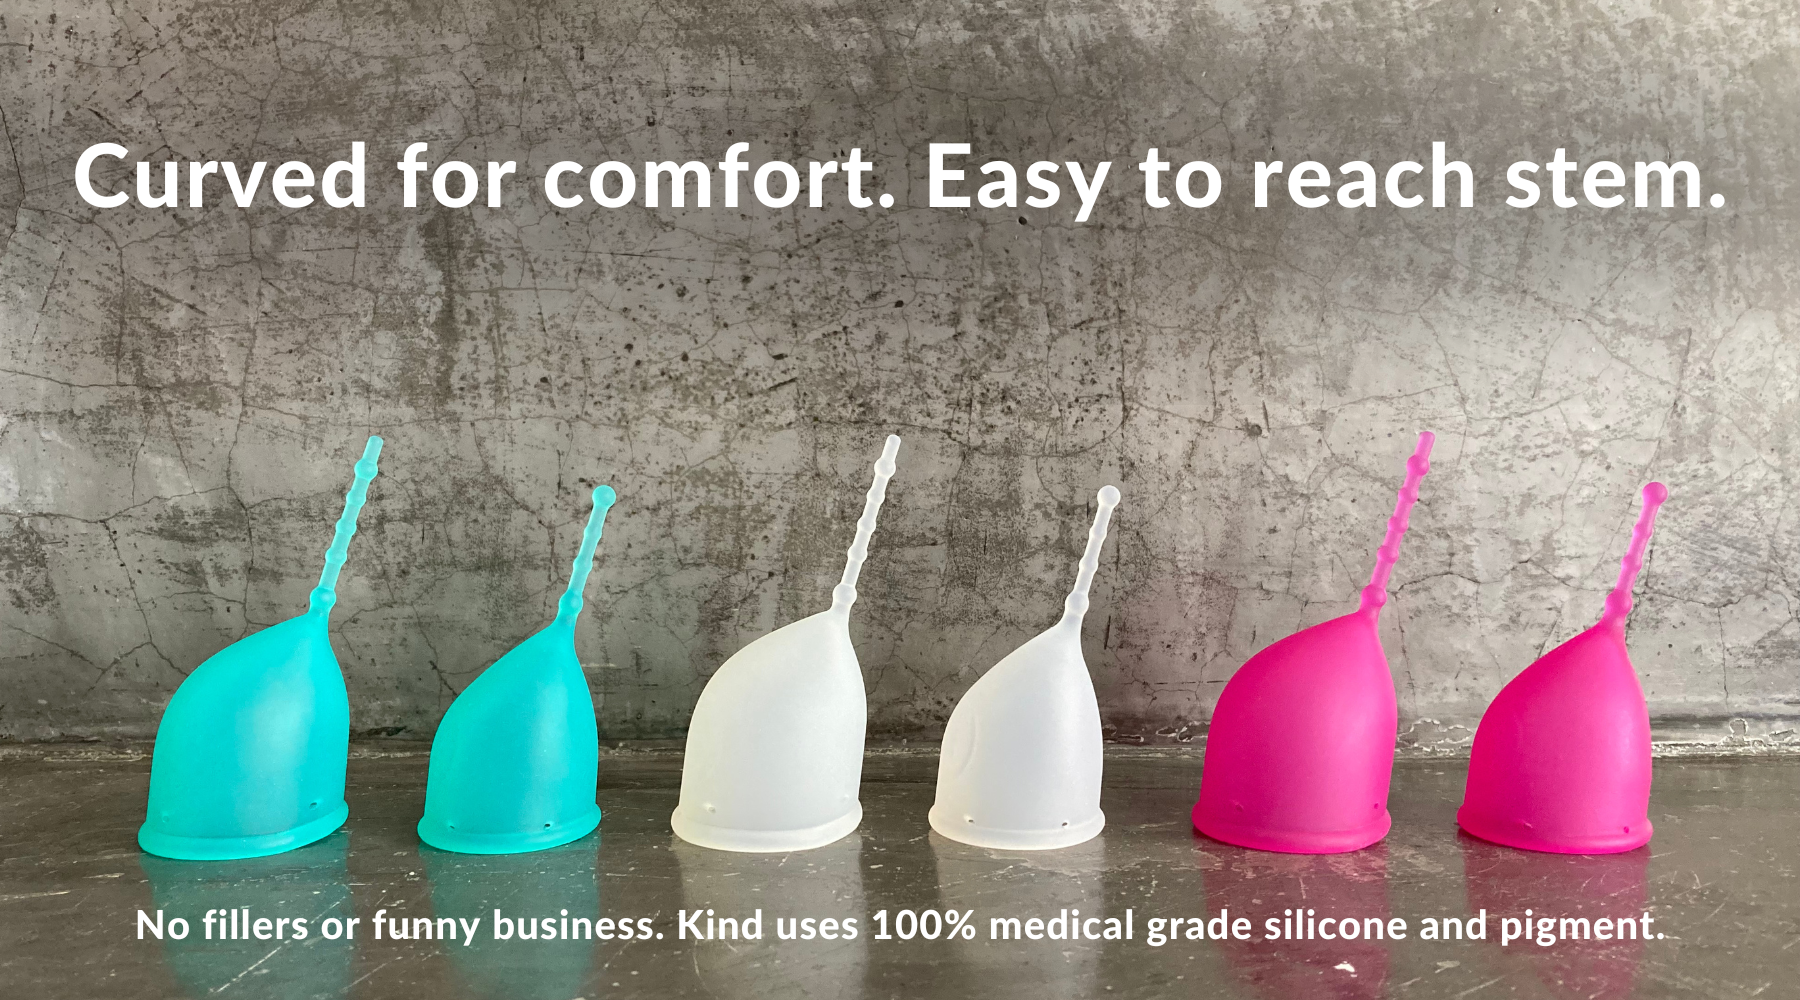 Kind Cup menstrual cup. Curved for comfort. Easy to reach stem. No fillers or funny business. Kind Cup uses 100% medical grade silicone and pigment. ID: Full lineup of Kind Cup ergonomic menstrual cup period product that looks comfortable and easy to use. Made in California. Made in USA. High cervix period cup. Menstrual cup with no pressure or cramps. High quality.